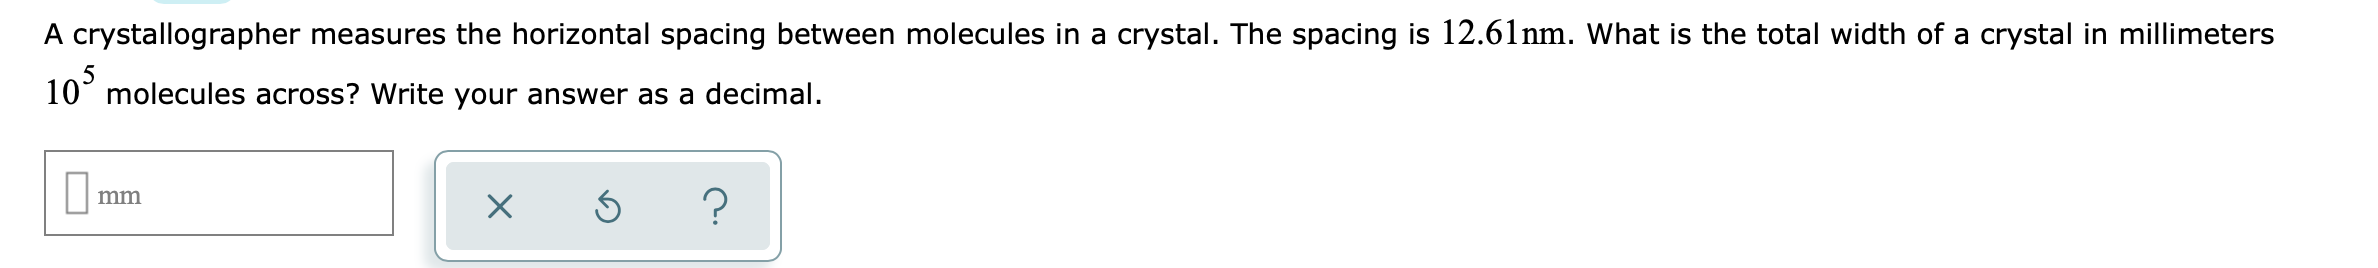 A crystallographer measures the horizontal spacing between molecules in a crystal. The spacing is 12.61nm. What is the total width of a crystal in millimeters
10 molecules across? Write your answer as a decimal.
?
mm
X
